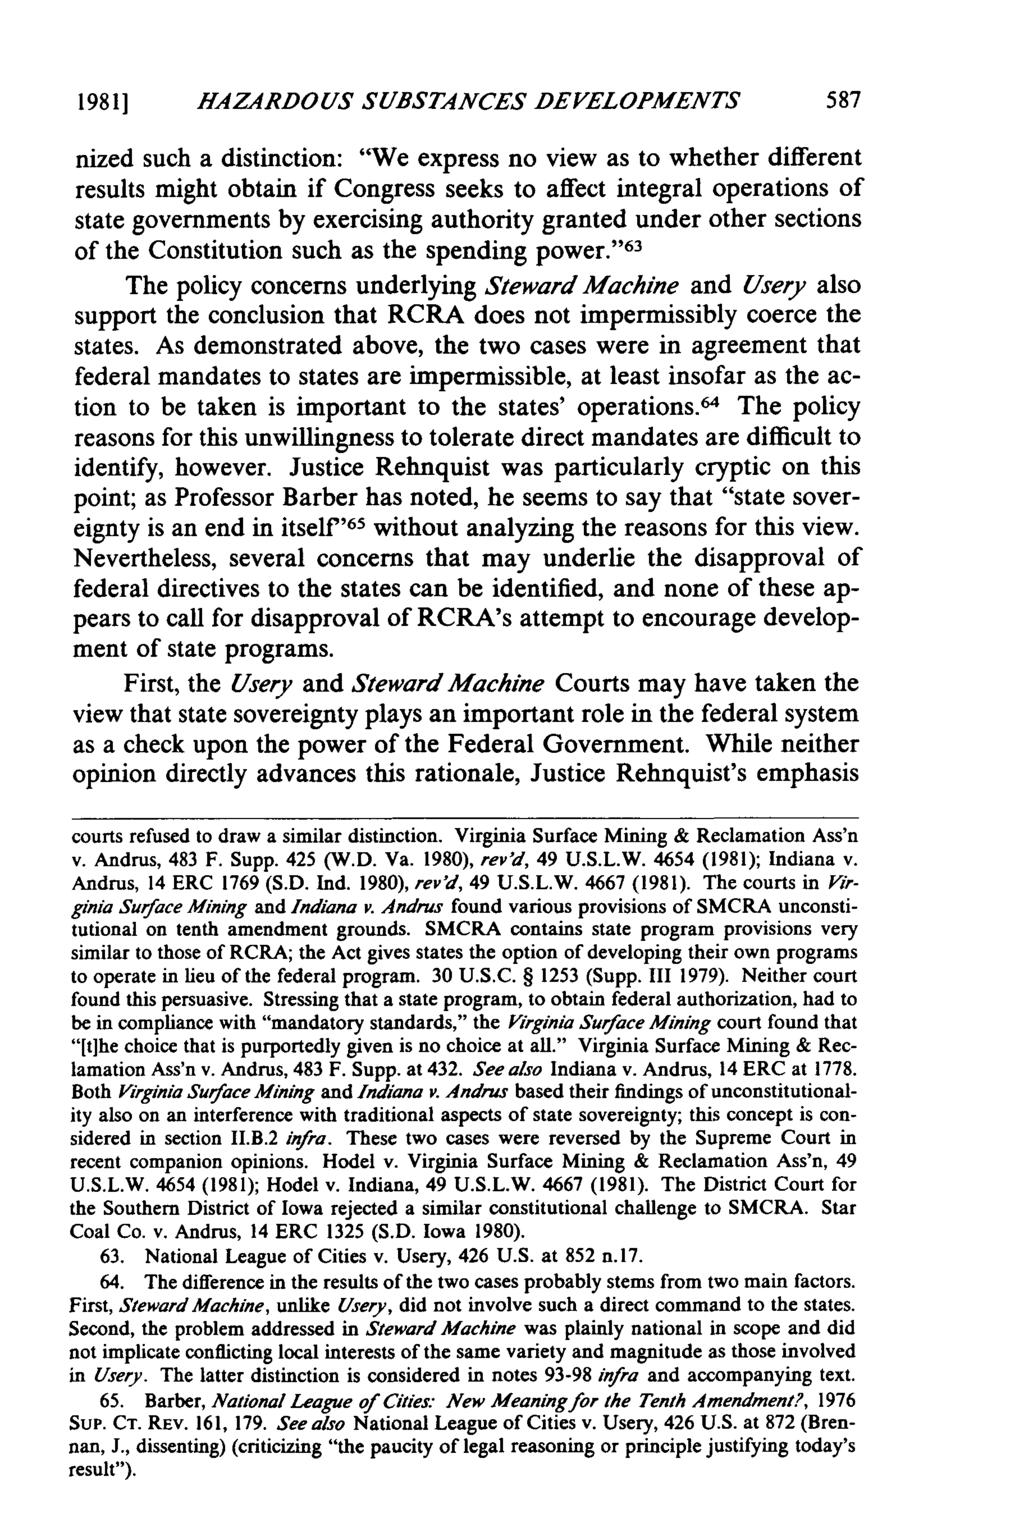 19811 HAZARDOUS SUBSTANCES DEVELOPMENTS nized such a distinction: "We express no view as to whether different results might obtain if Congress seeks to affect integral operations of state governments